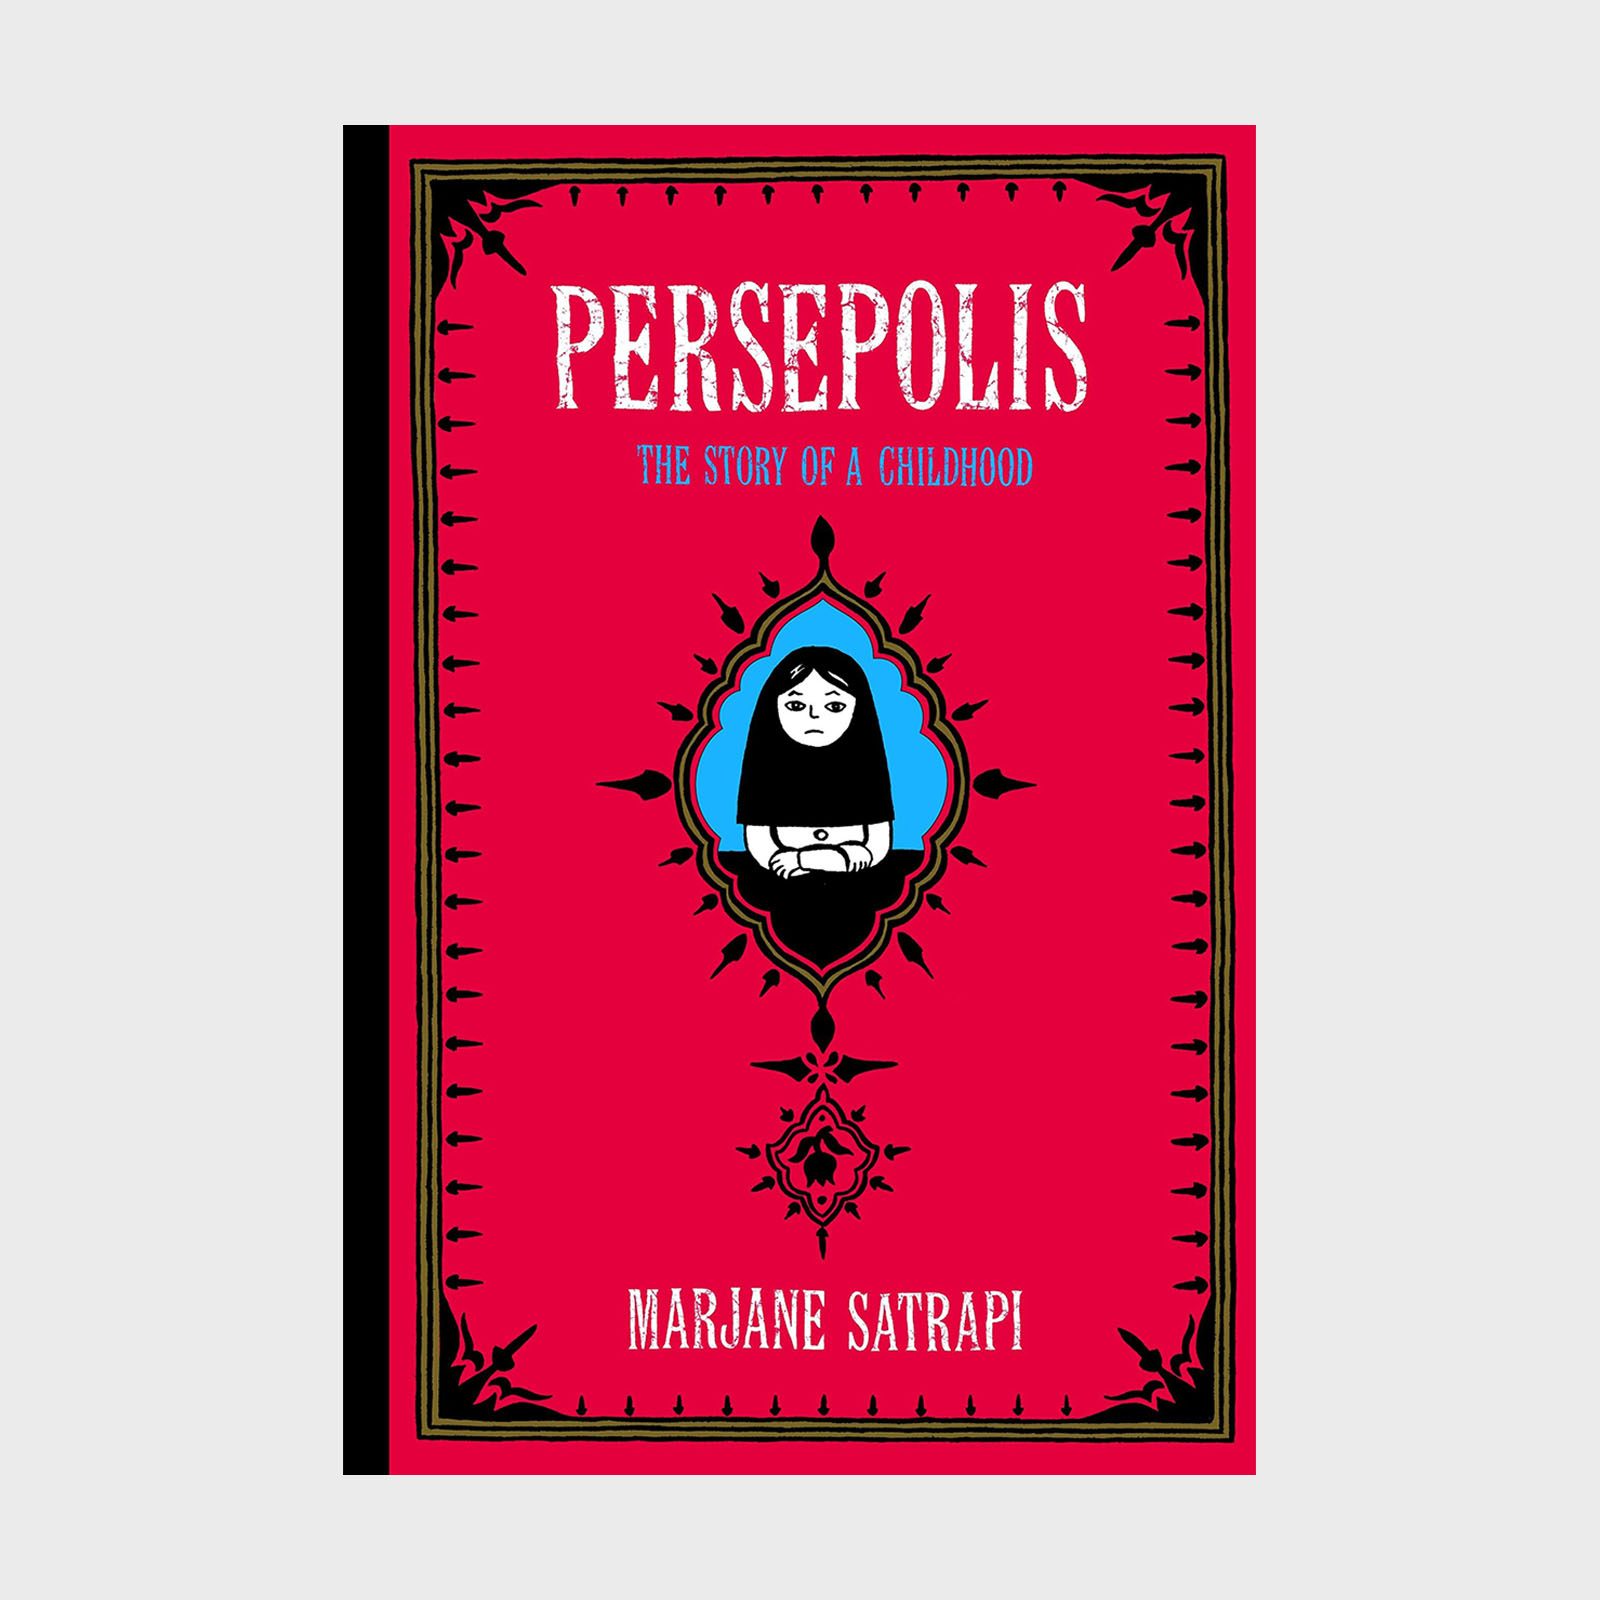 https://www.rd.com/wp-content/uploads/2020/01/46_Persepolis-The-Story-of-a-Childhood-by-Marjane-Satrapi-via-amazon.jpg?fit=700%2C700